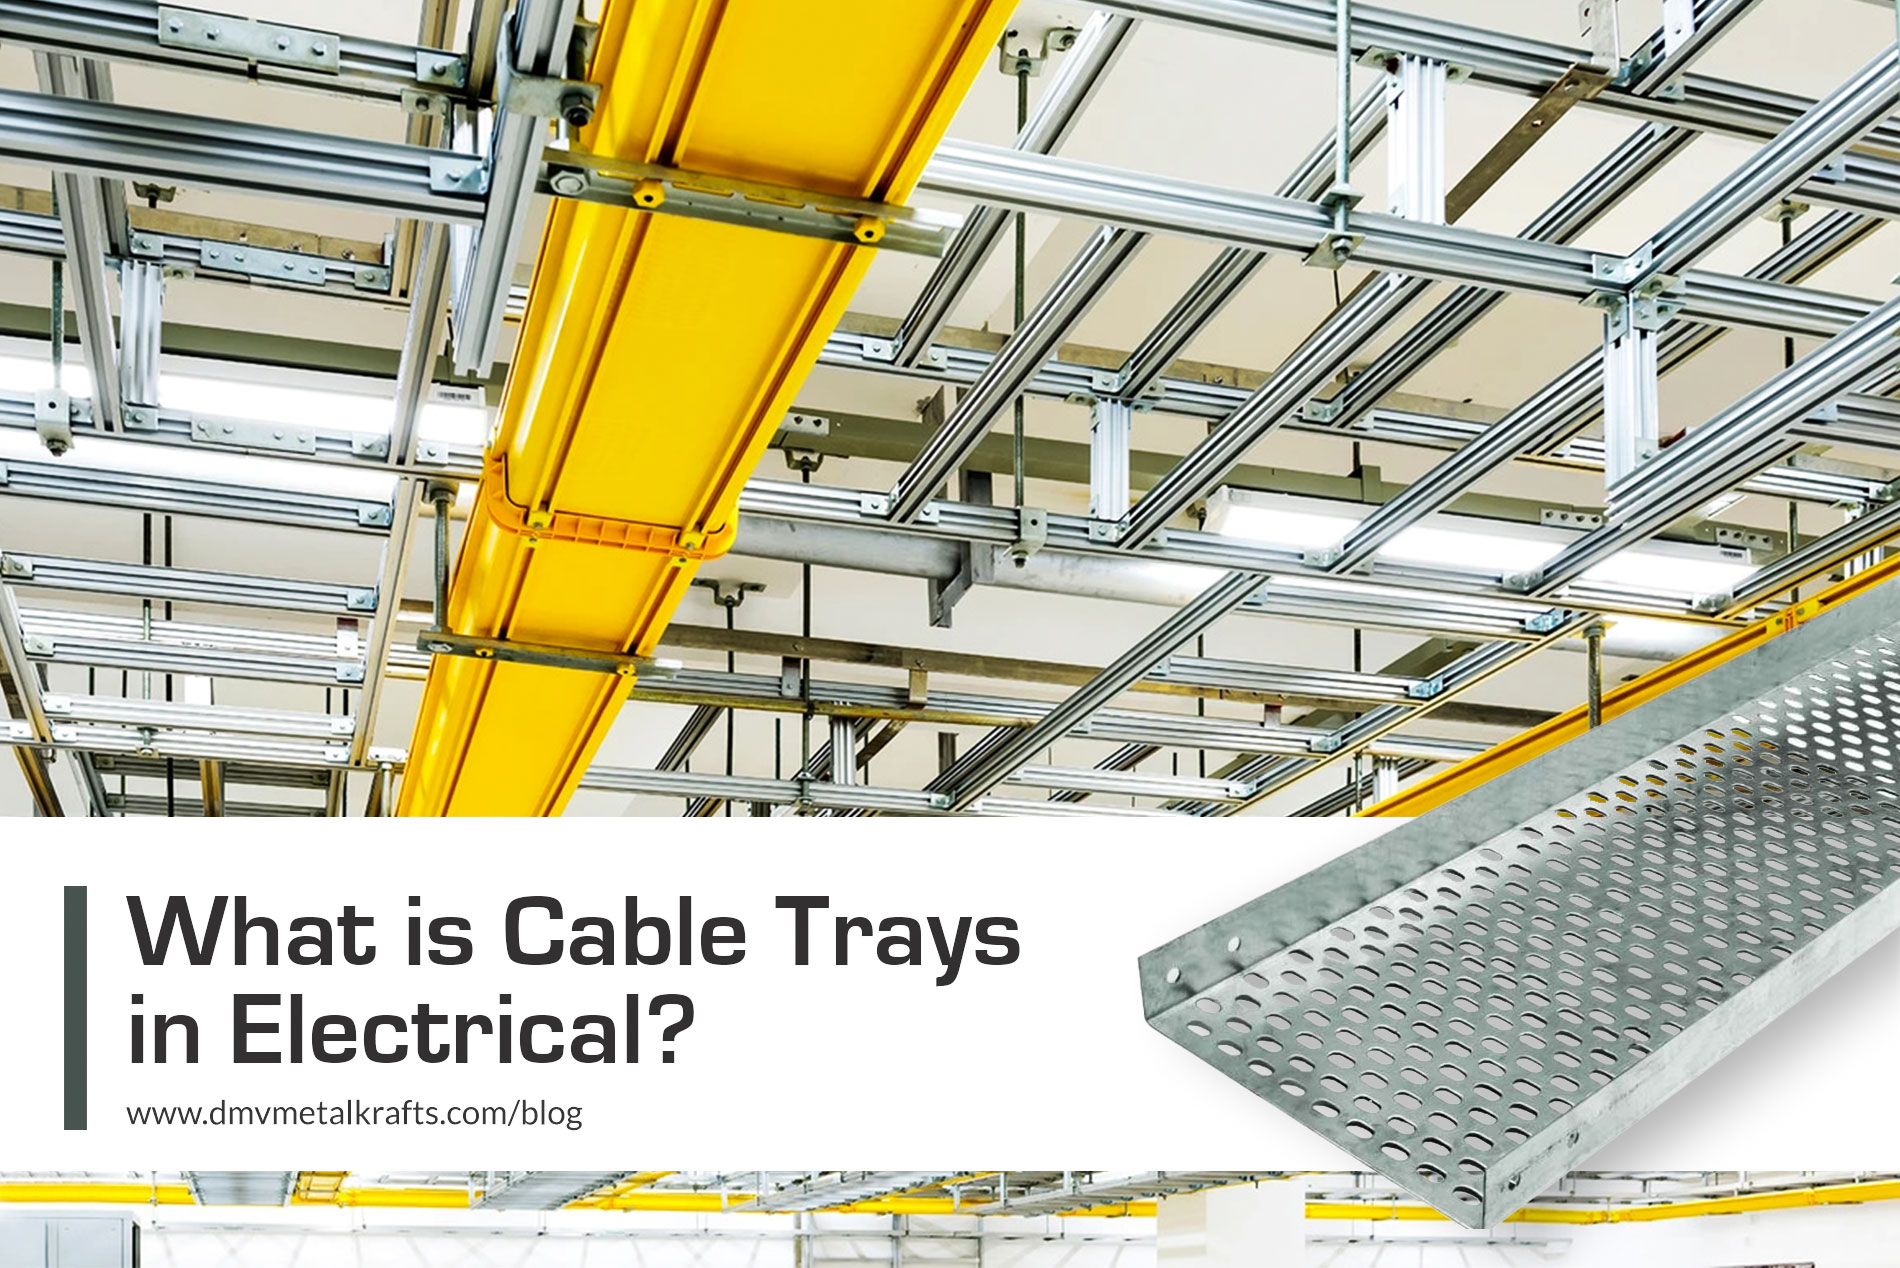 What is Cable Trays in Electrical?